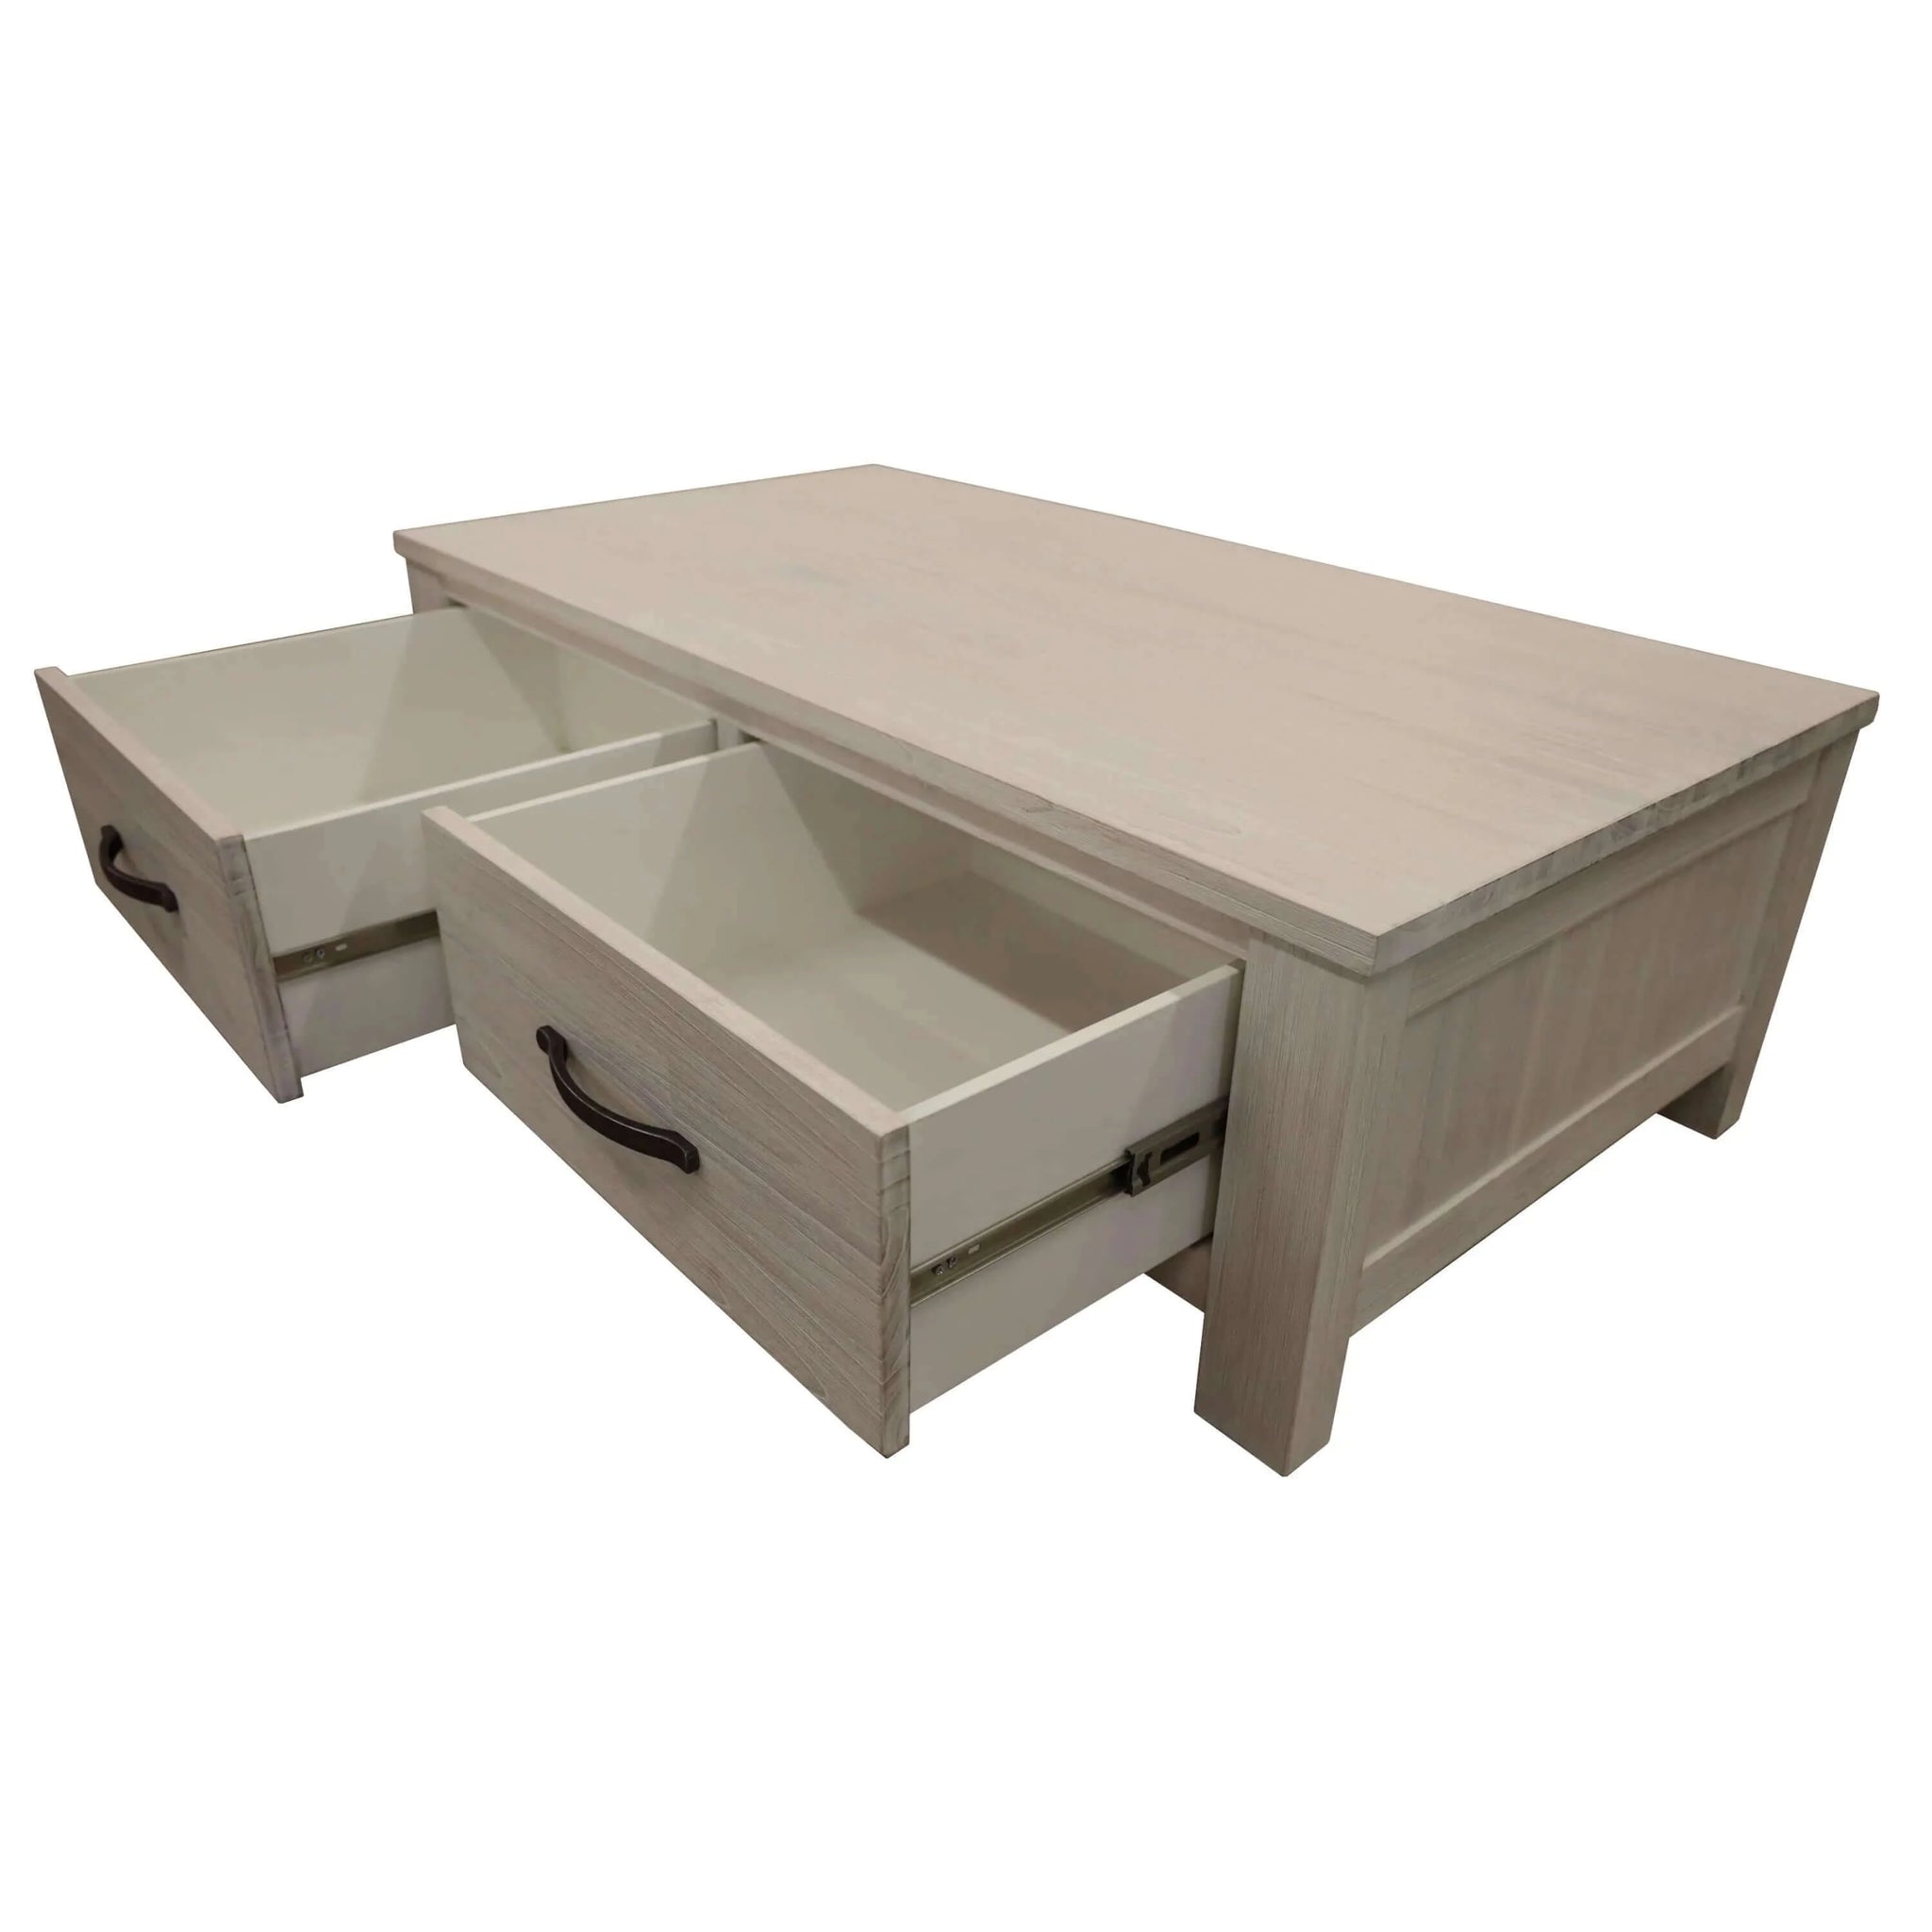 Foxglove Coffee Table 127cm 2 Drawer Solid Mt Ash Timber Wood - White-Upinteriors